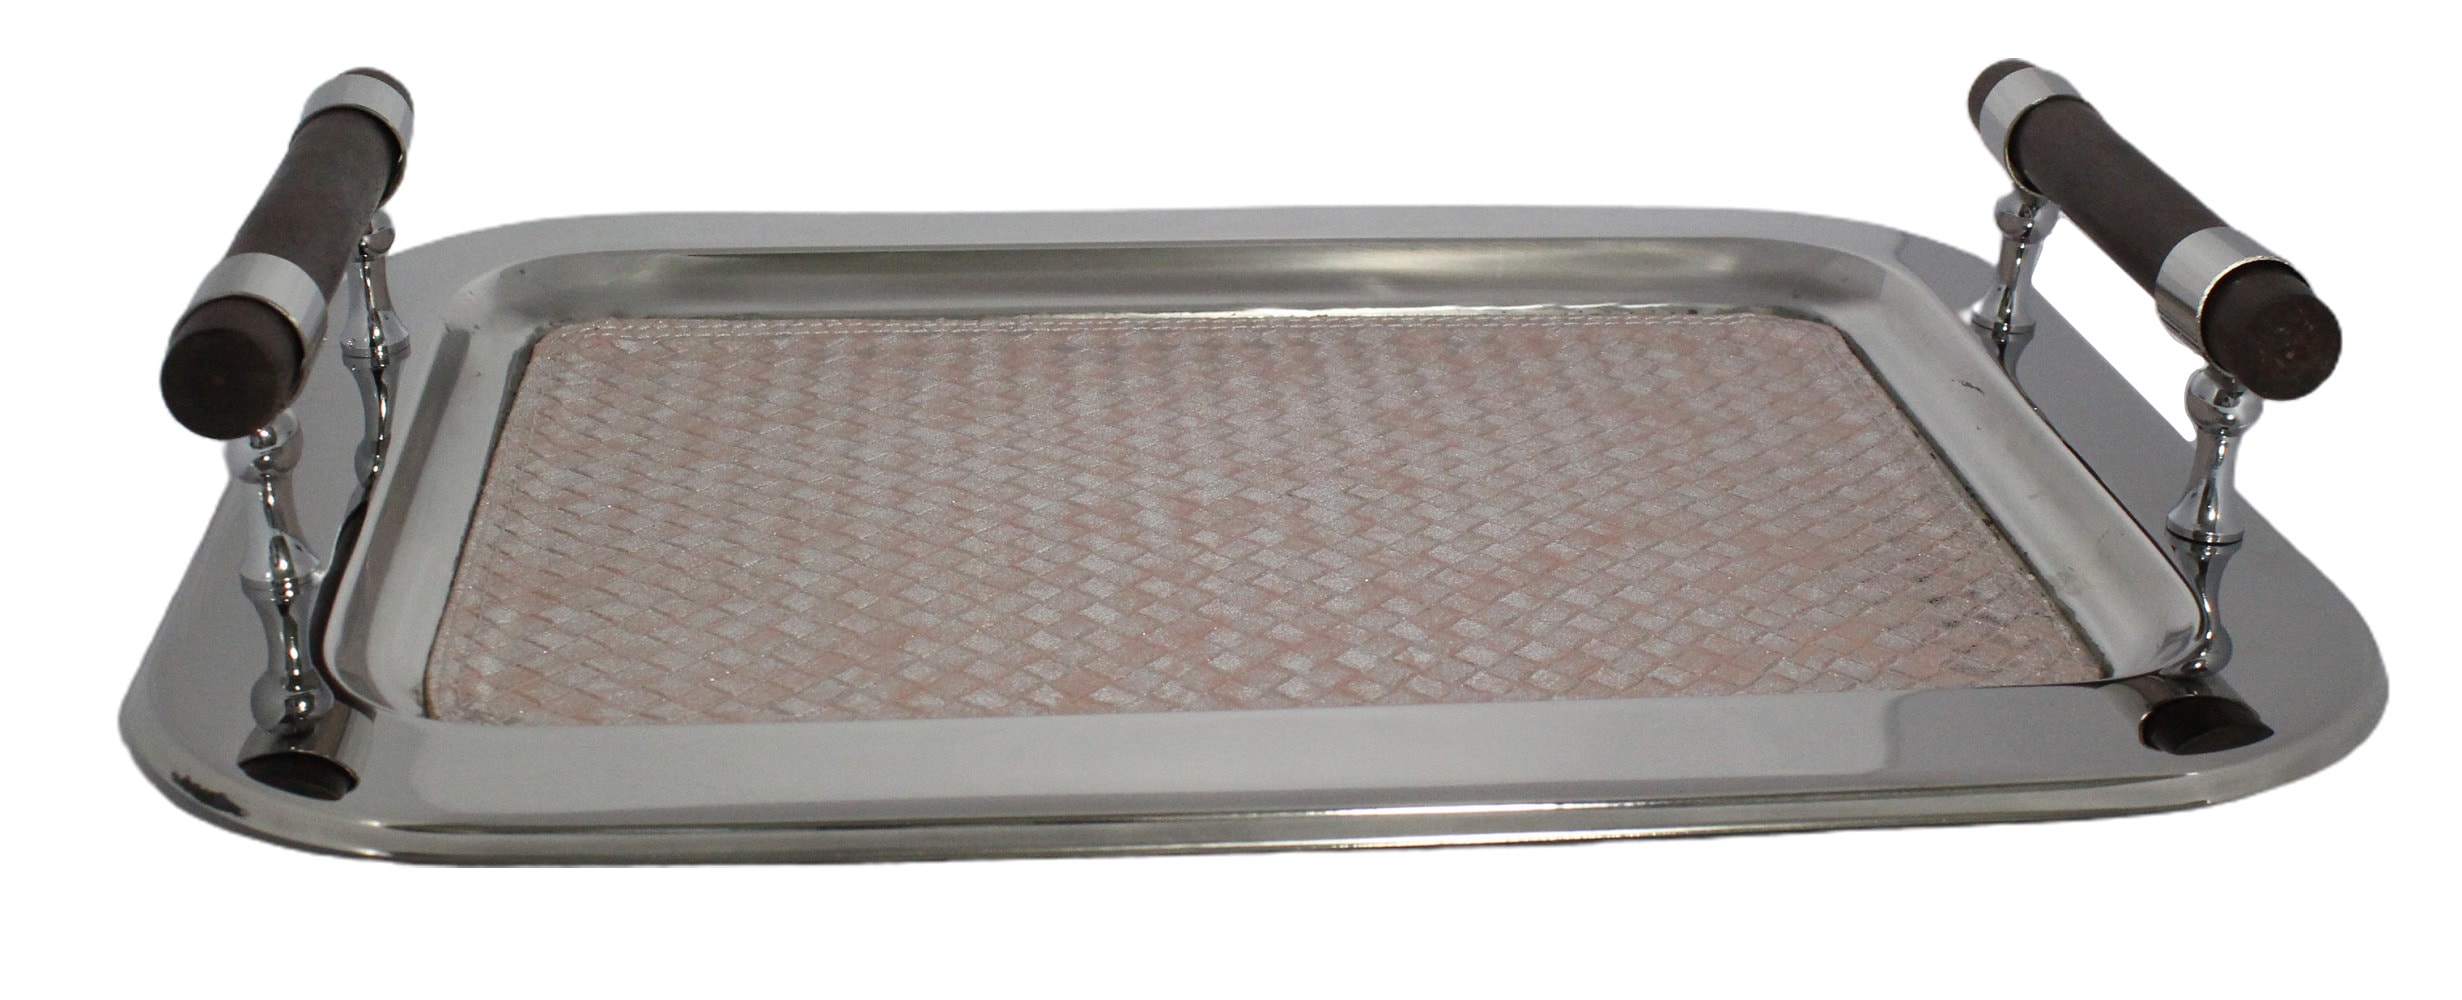 Sol Living 16.5-in x 13-in Stainless Steel Rectangle Serving Tray